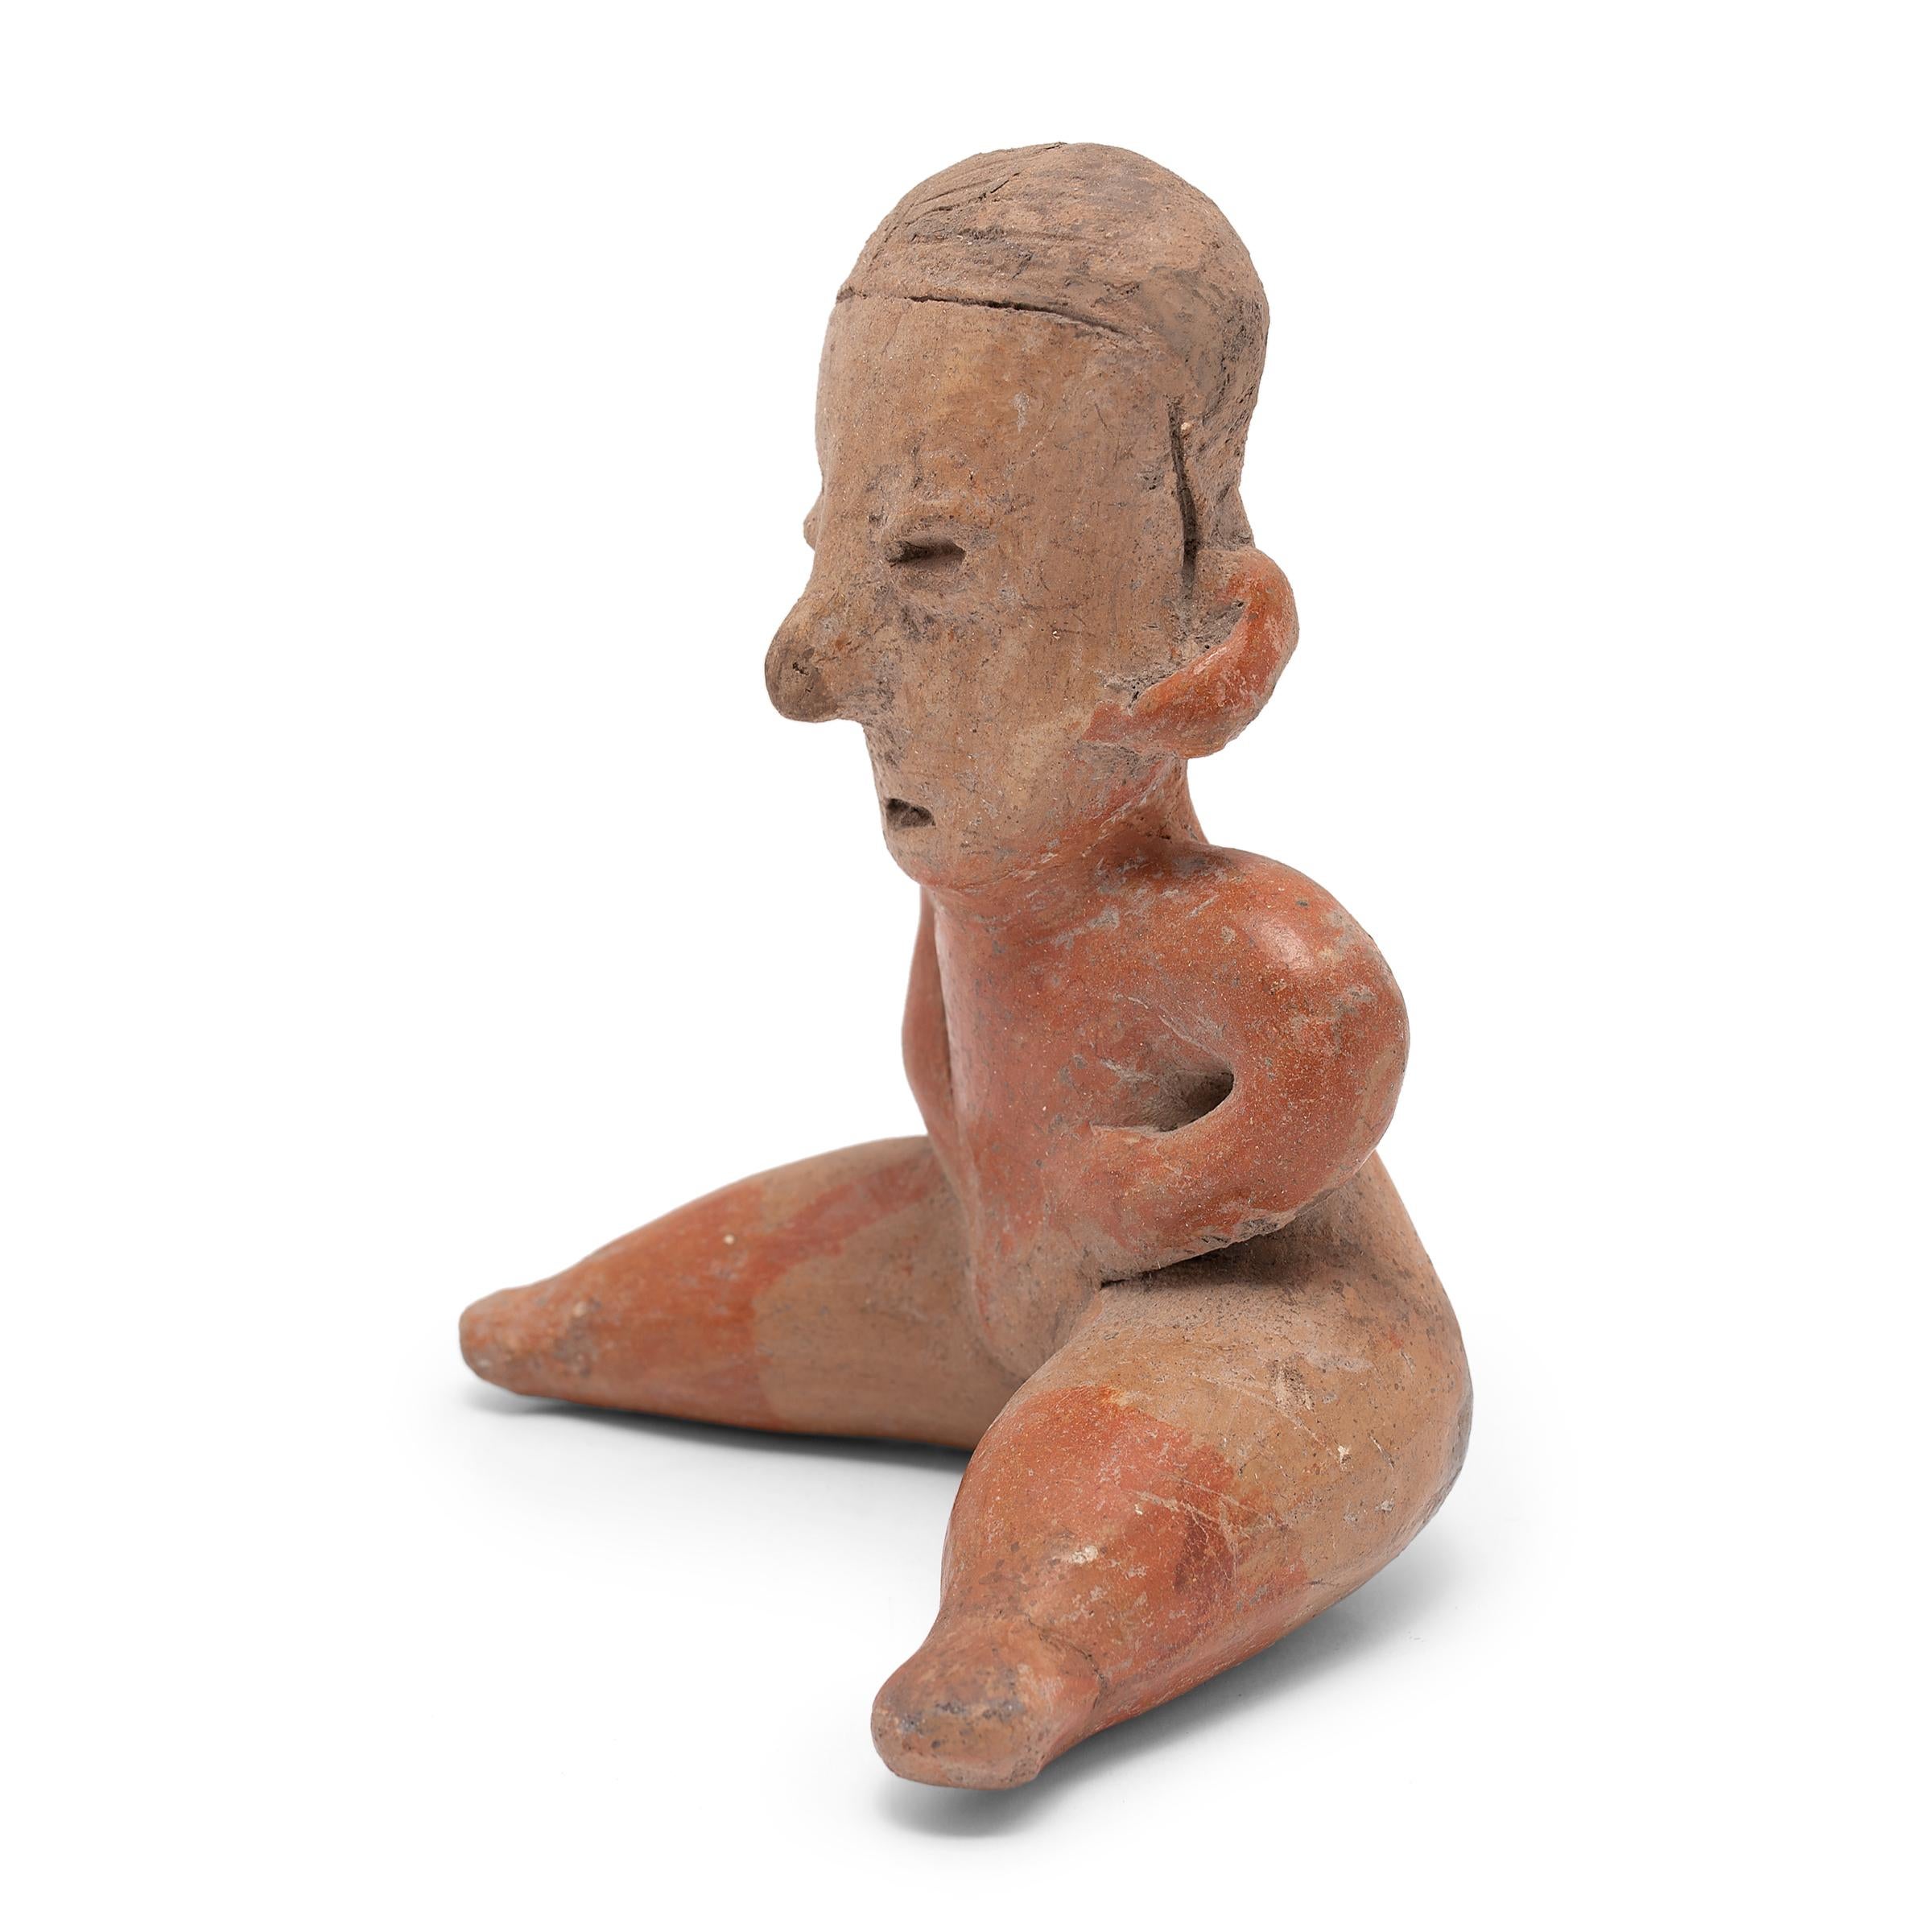 This seated effigy figure was crafted in 300 BC to 300 AD from the ancient Nayarit region of Mexico and was likely used as a ritual or burial offering. The ceramic works of the Chinesco style are often distinguished by puffy, slit-like eyes blended